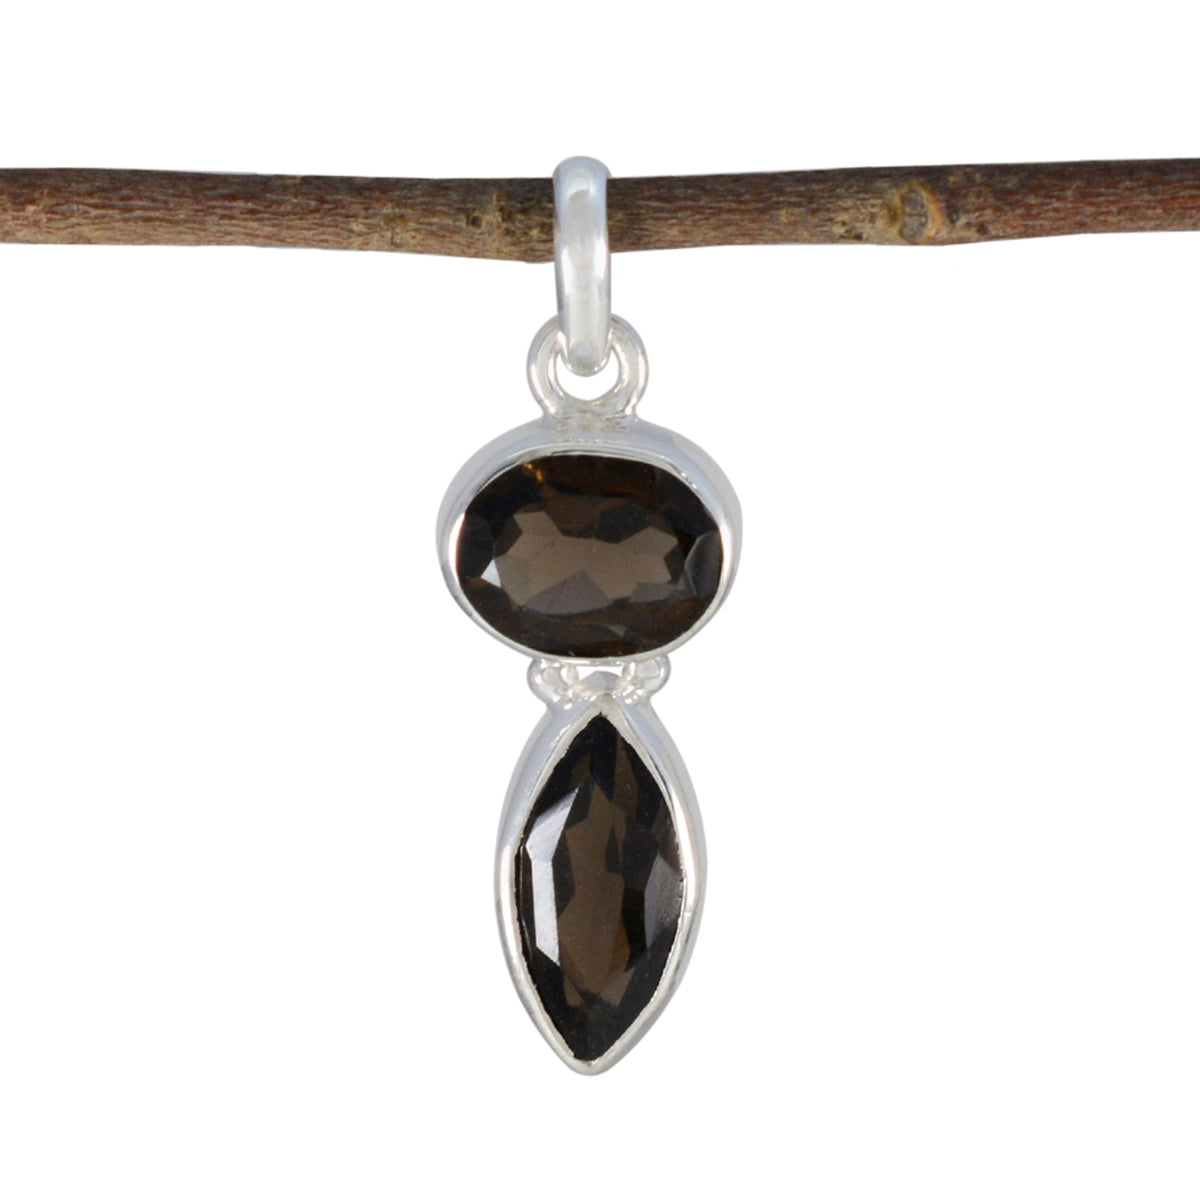 Riyo Fanciable Gemstone Multi Faceted Brown Smoky Quartz 1098 Sterling Silver Pendant Gift For Good Friday